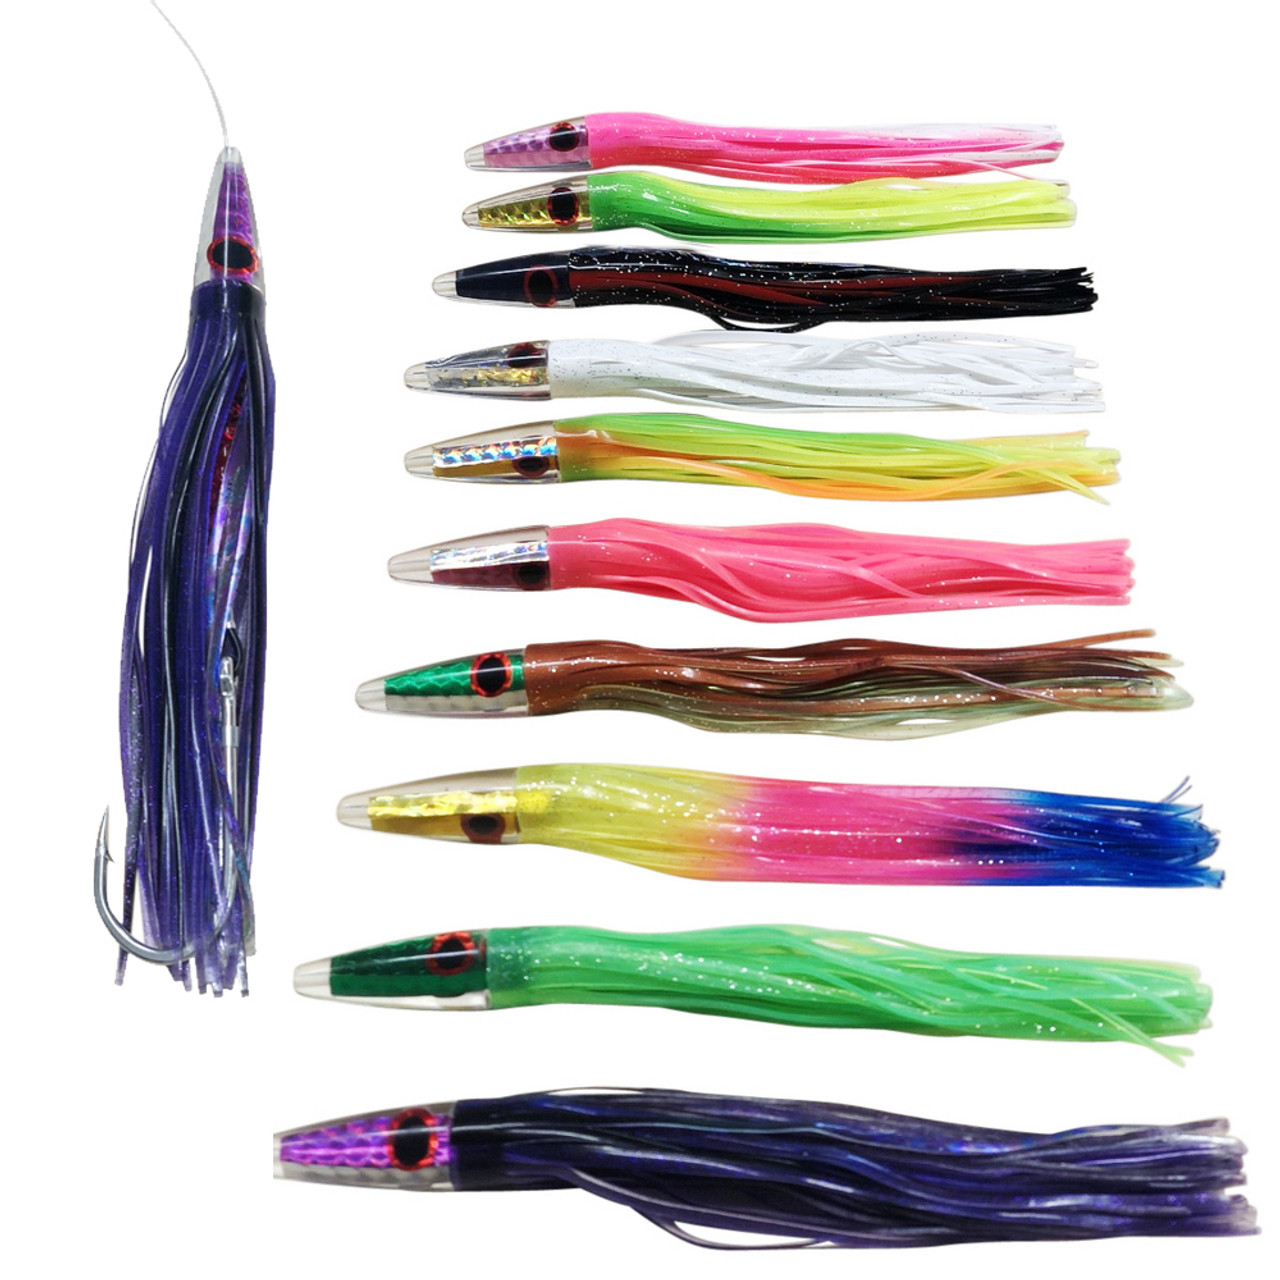 19″ Side Tracker with 9″ SOFT HEAD Machine Lures